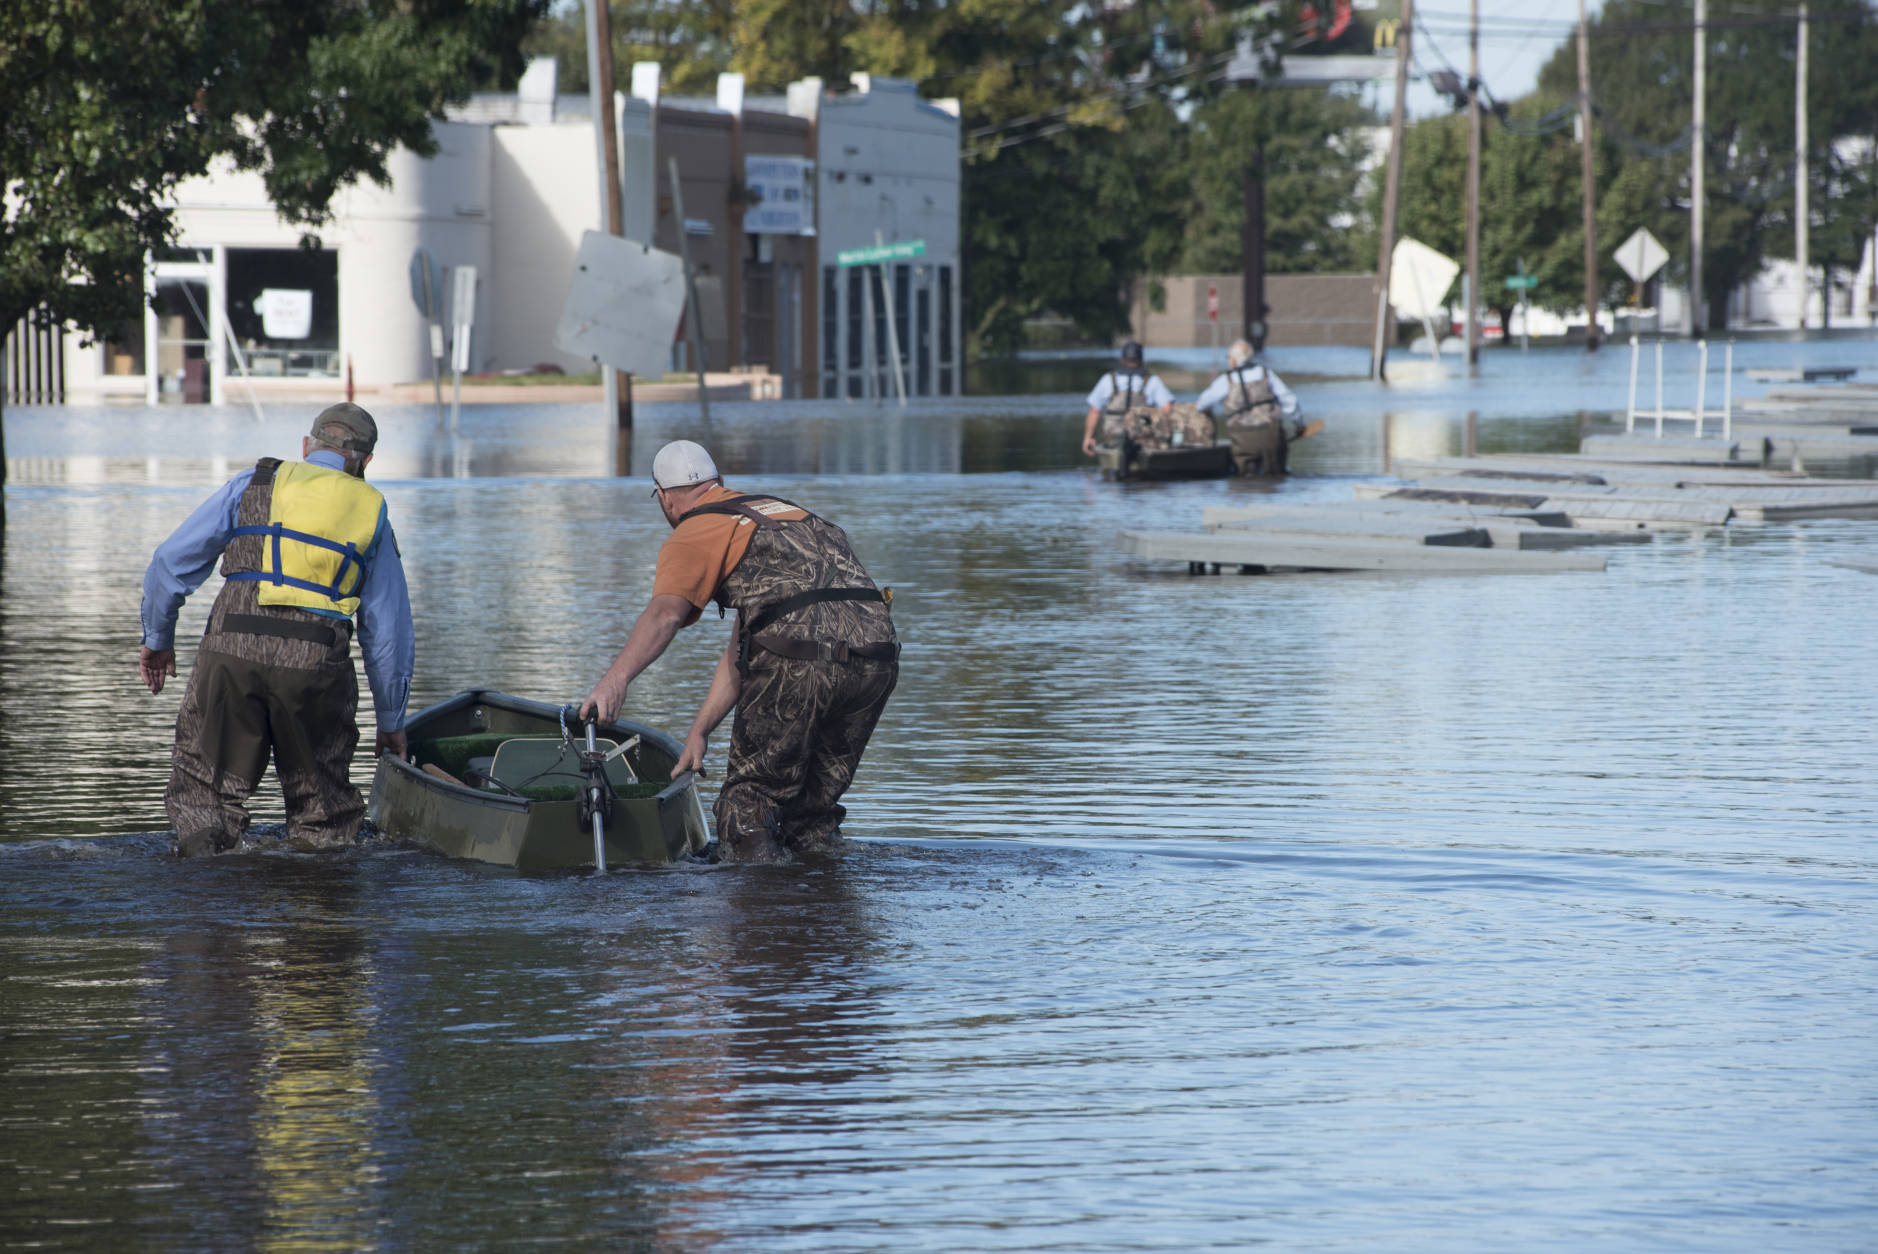 Workers with the City of Lumberton use boats to travel down West 5th Street to the cities water treatment plant through floodwaters caused by rain from Hurricane in Lumberton, N.C., Wednesday, Oct. 12, 2016. (AP Photo/Mike Spencer)